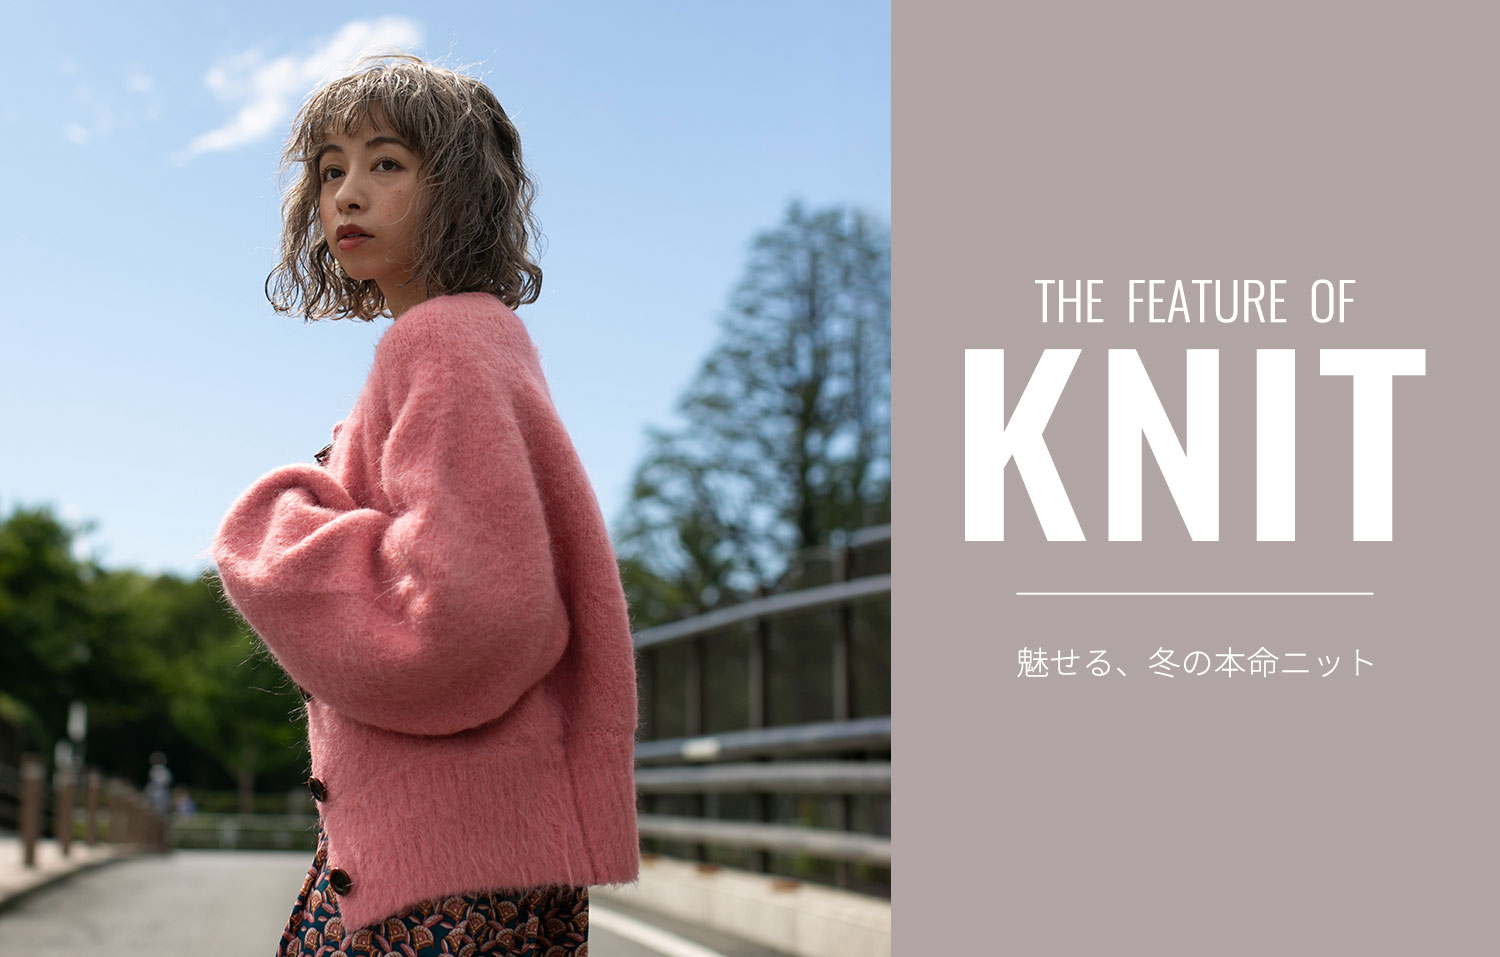 THE FEATURE OF KNIT 魅せる、冬の本命ニット | ROSE BUD (ローズ